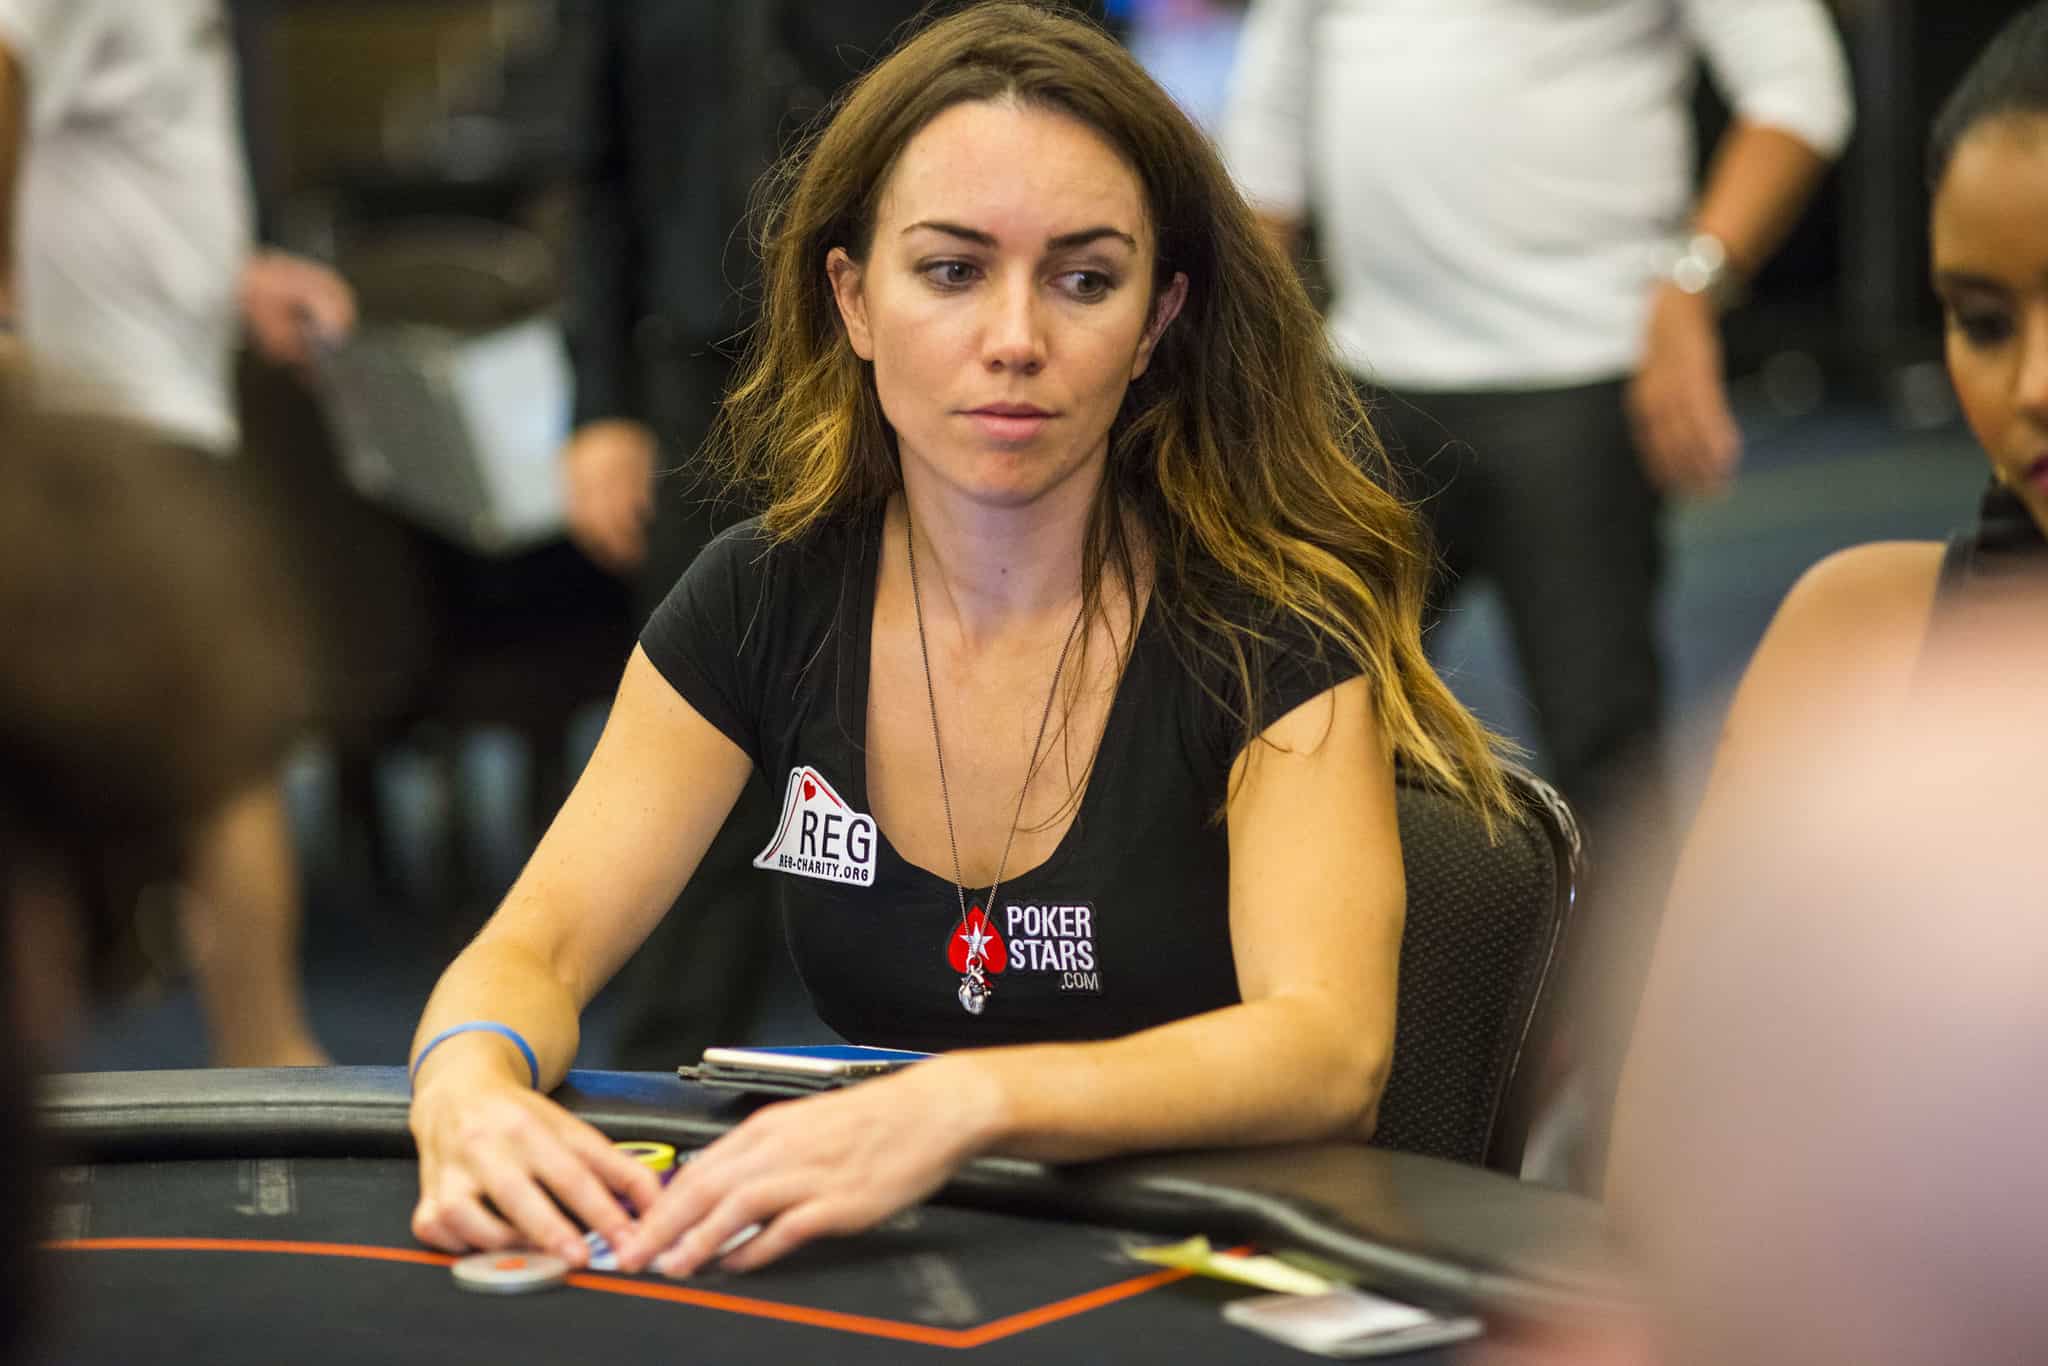 Who is Liv Boeree? ⋆ What is the meaning of